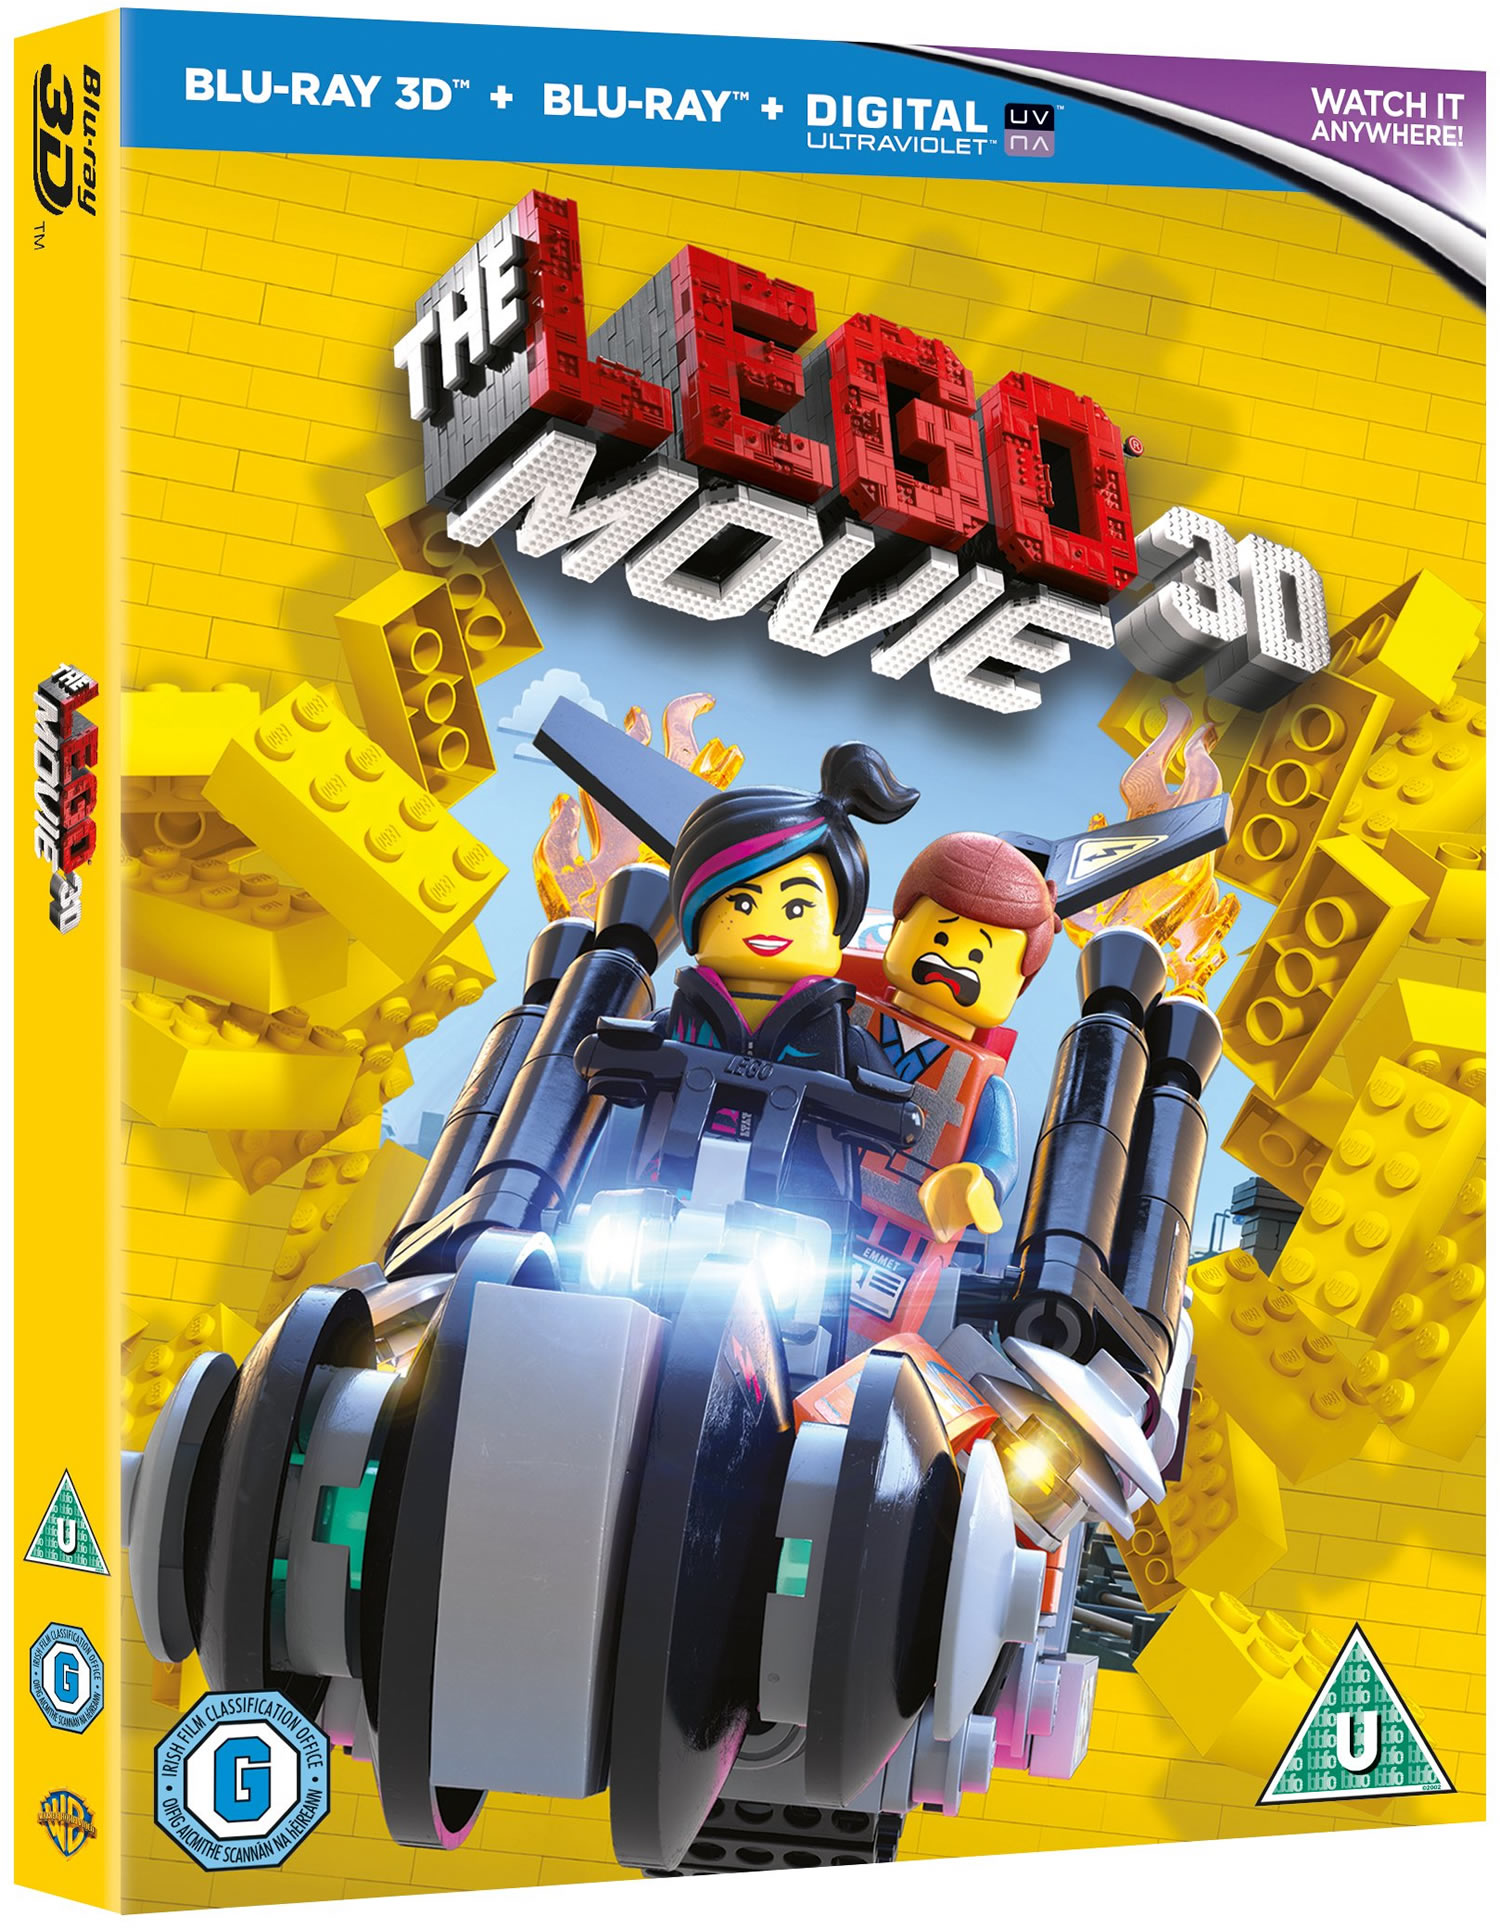 The LEGO Movie Blu-ray cover